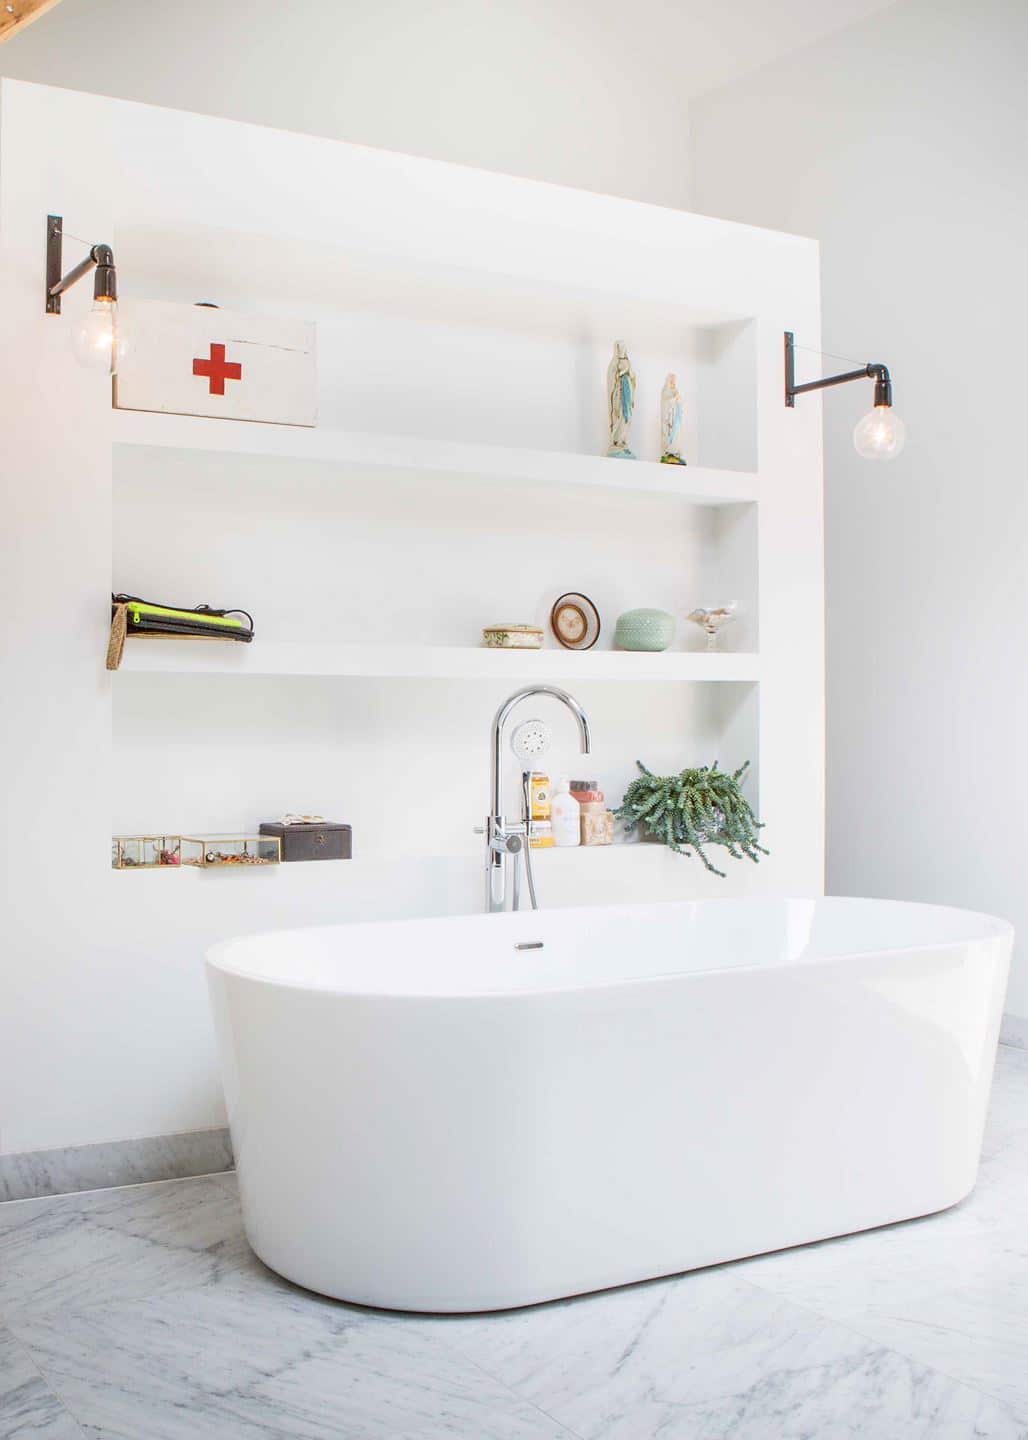 a spacious bathroom with free standing modern tub and open shelving | house tour on coco kelley